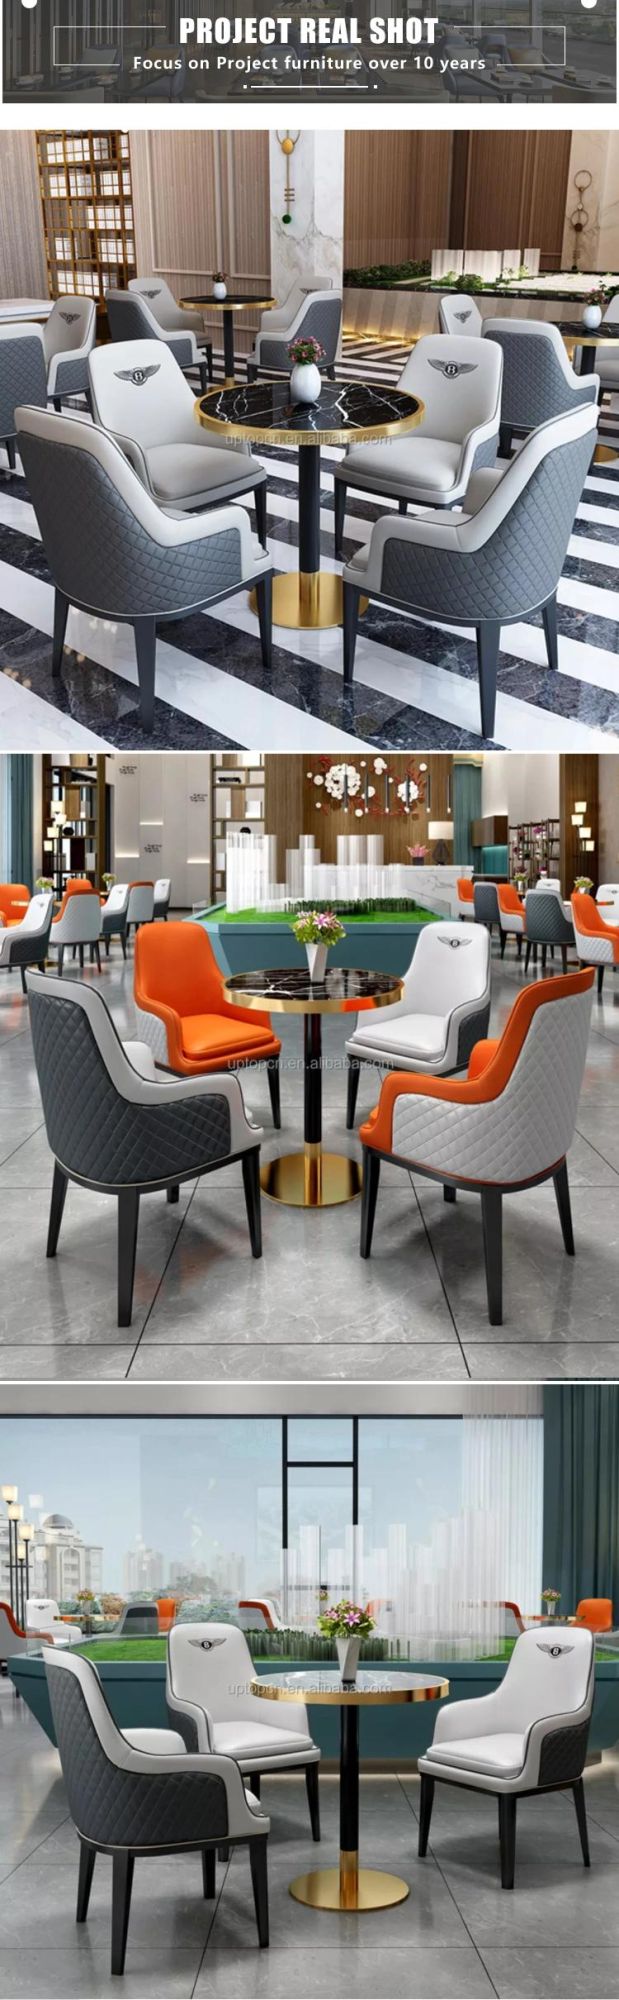 Leather Hotel Sofa Hotel Reception Furniture Cafe Sofa Cafe Table and Chair Dining Room Furniture Sofa for Restaurant